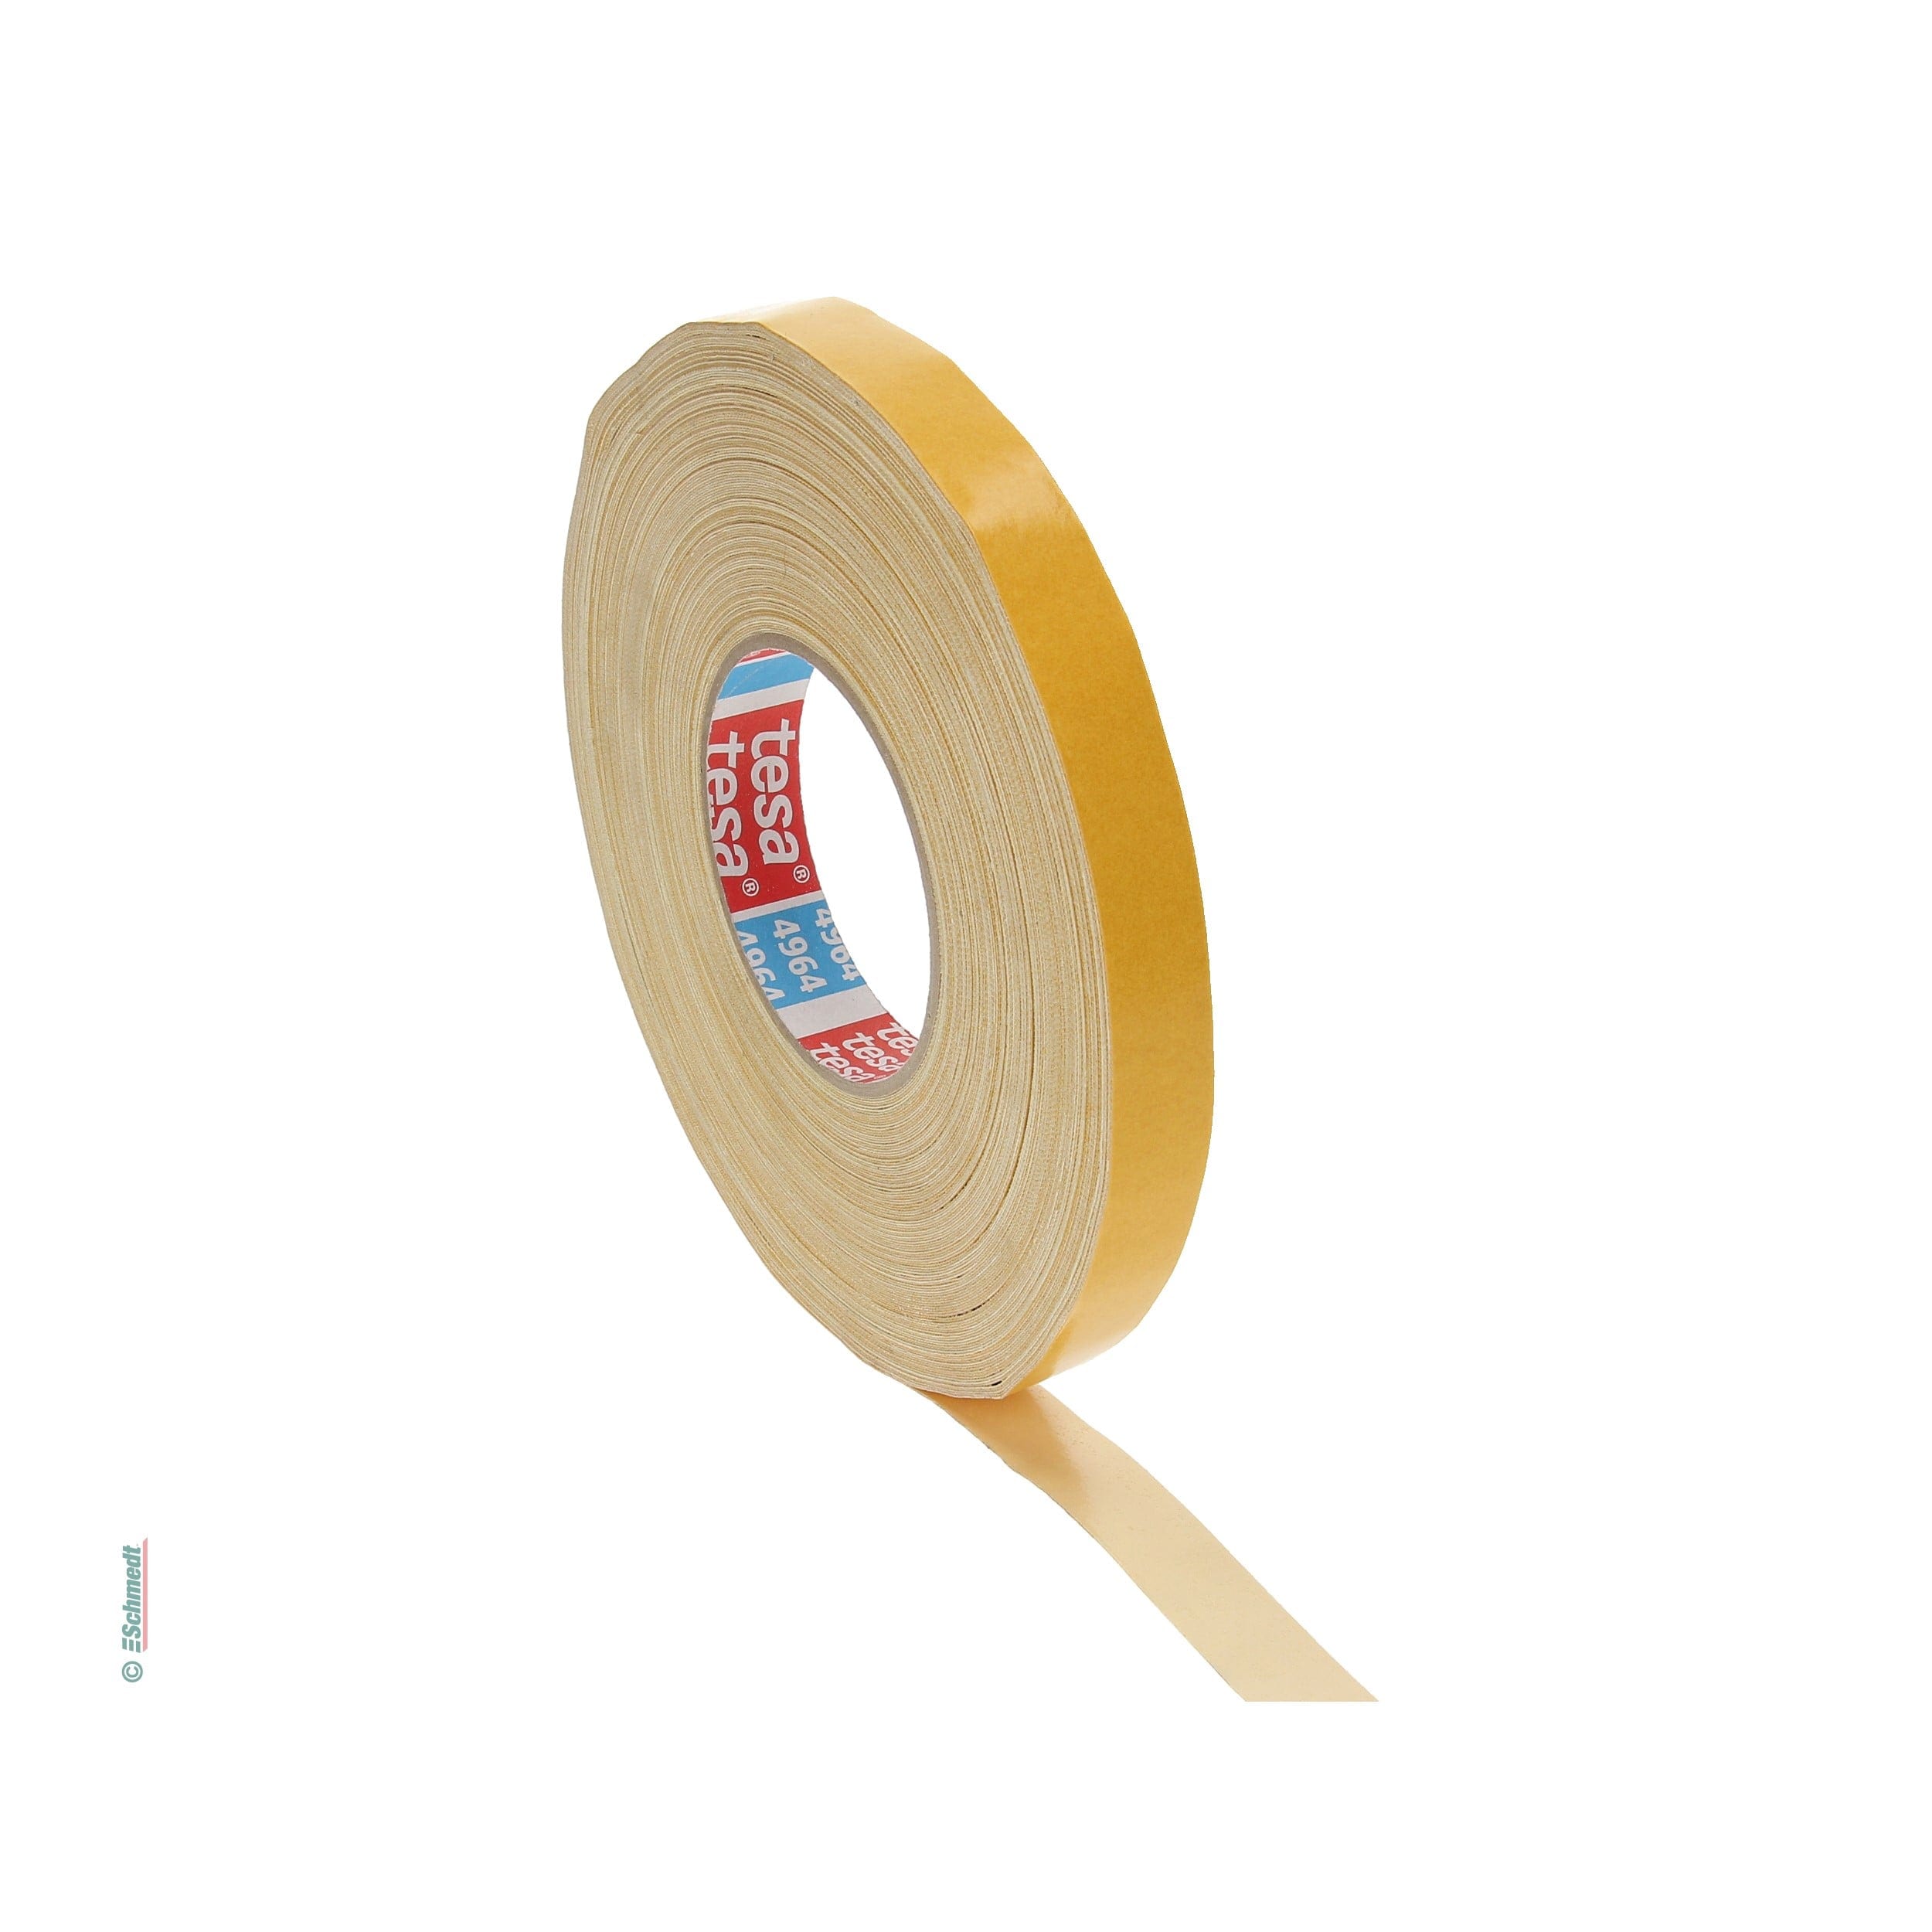 Adhesive tape  Adhesive products, fastening, packaging material